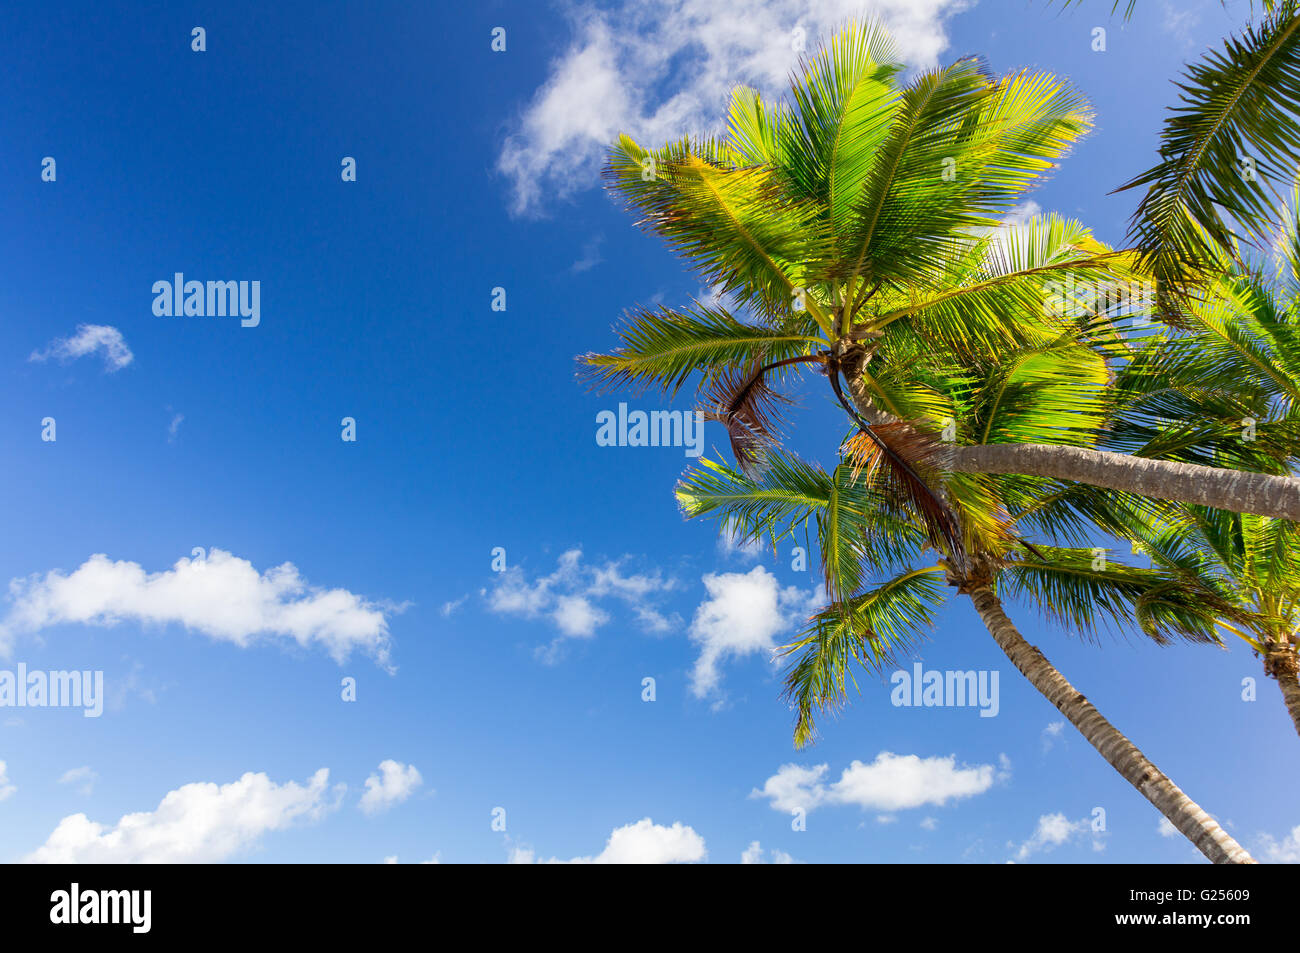 Palm tree under bright blue sky with clouds Stock Photo